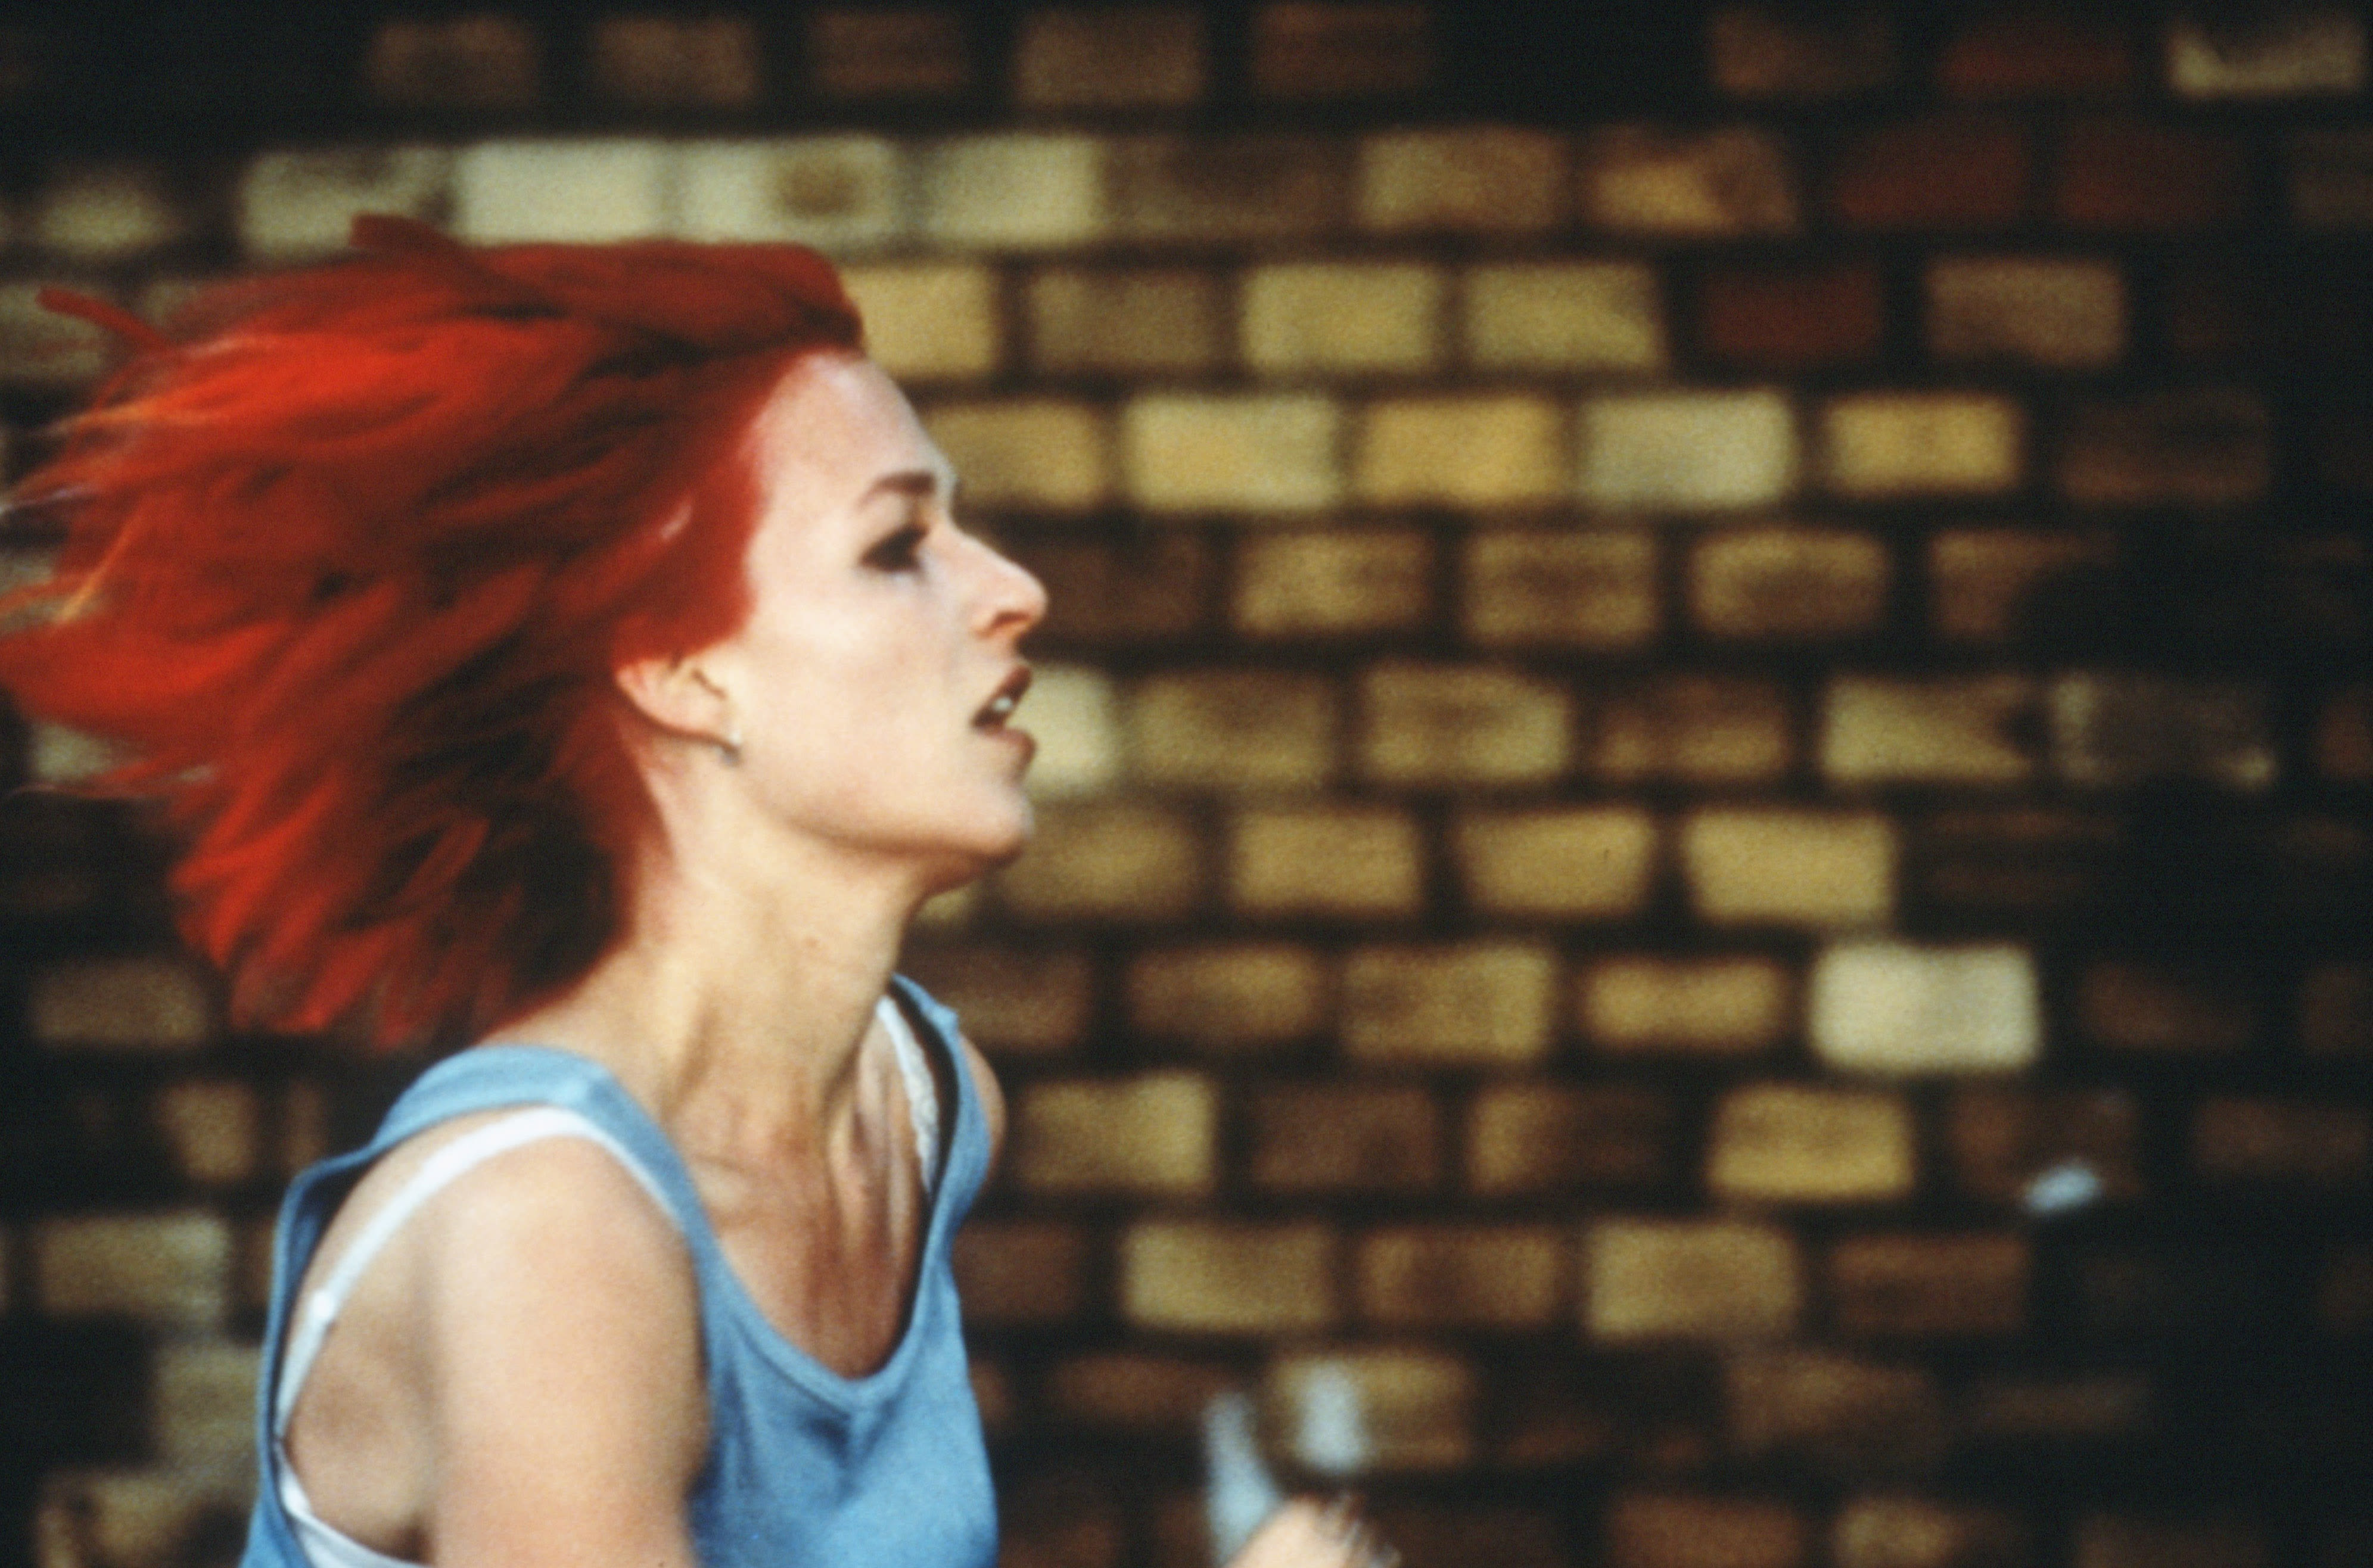 In 1999, ‘Run Lola Run’ Saw the Future. Rereleased 25 Years Later, the Film Is More Exhilarating Than Ever